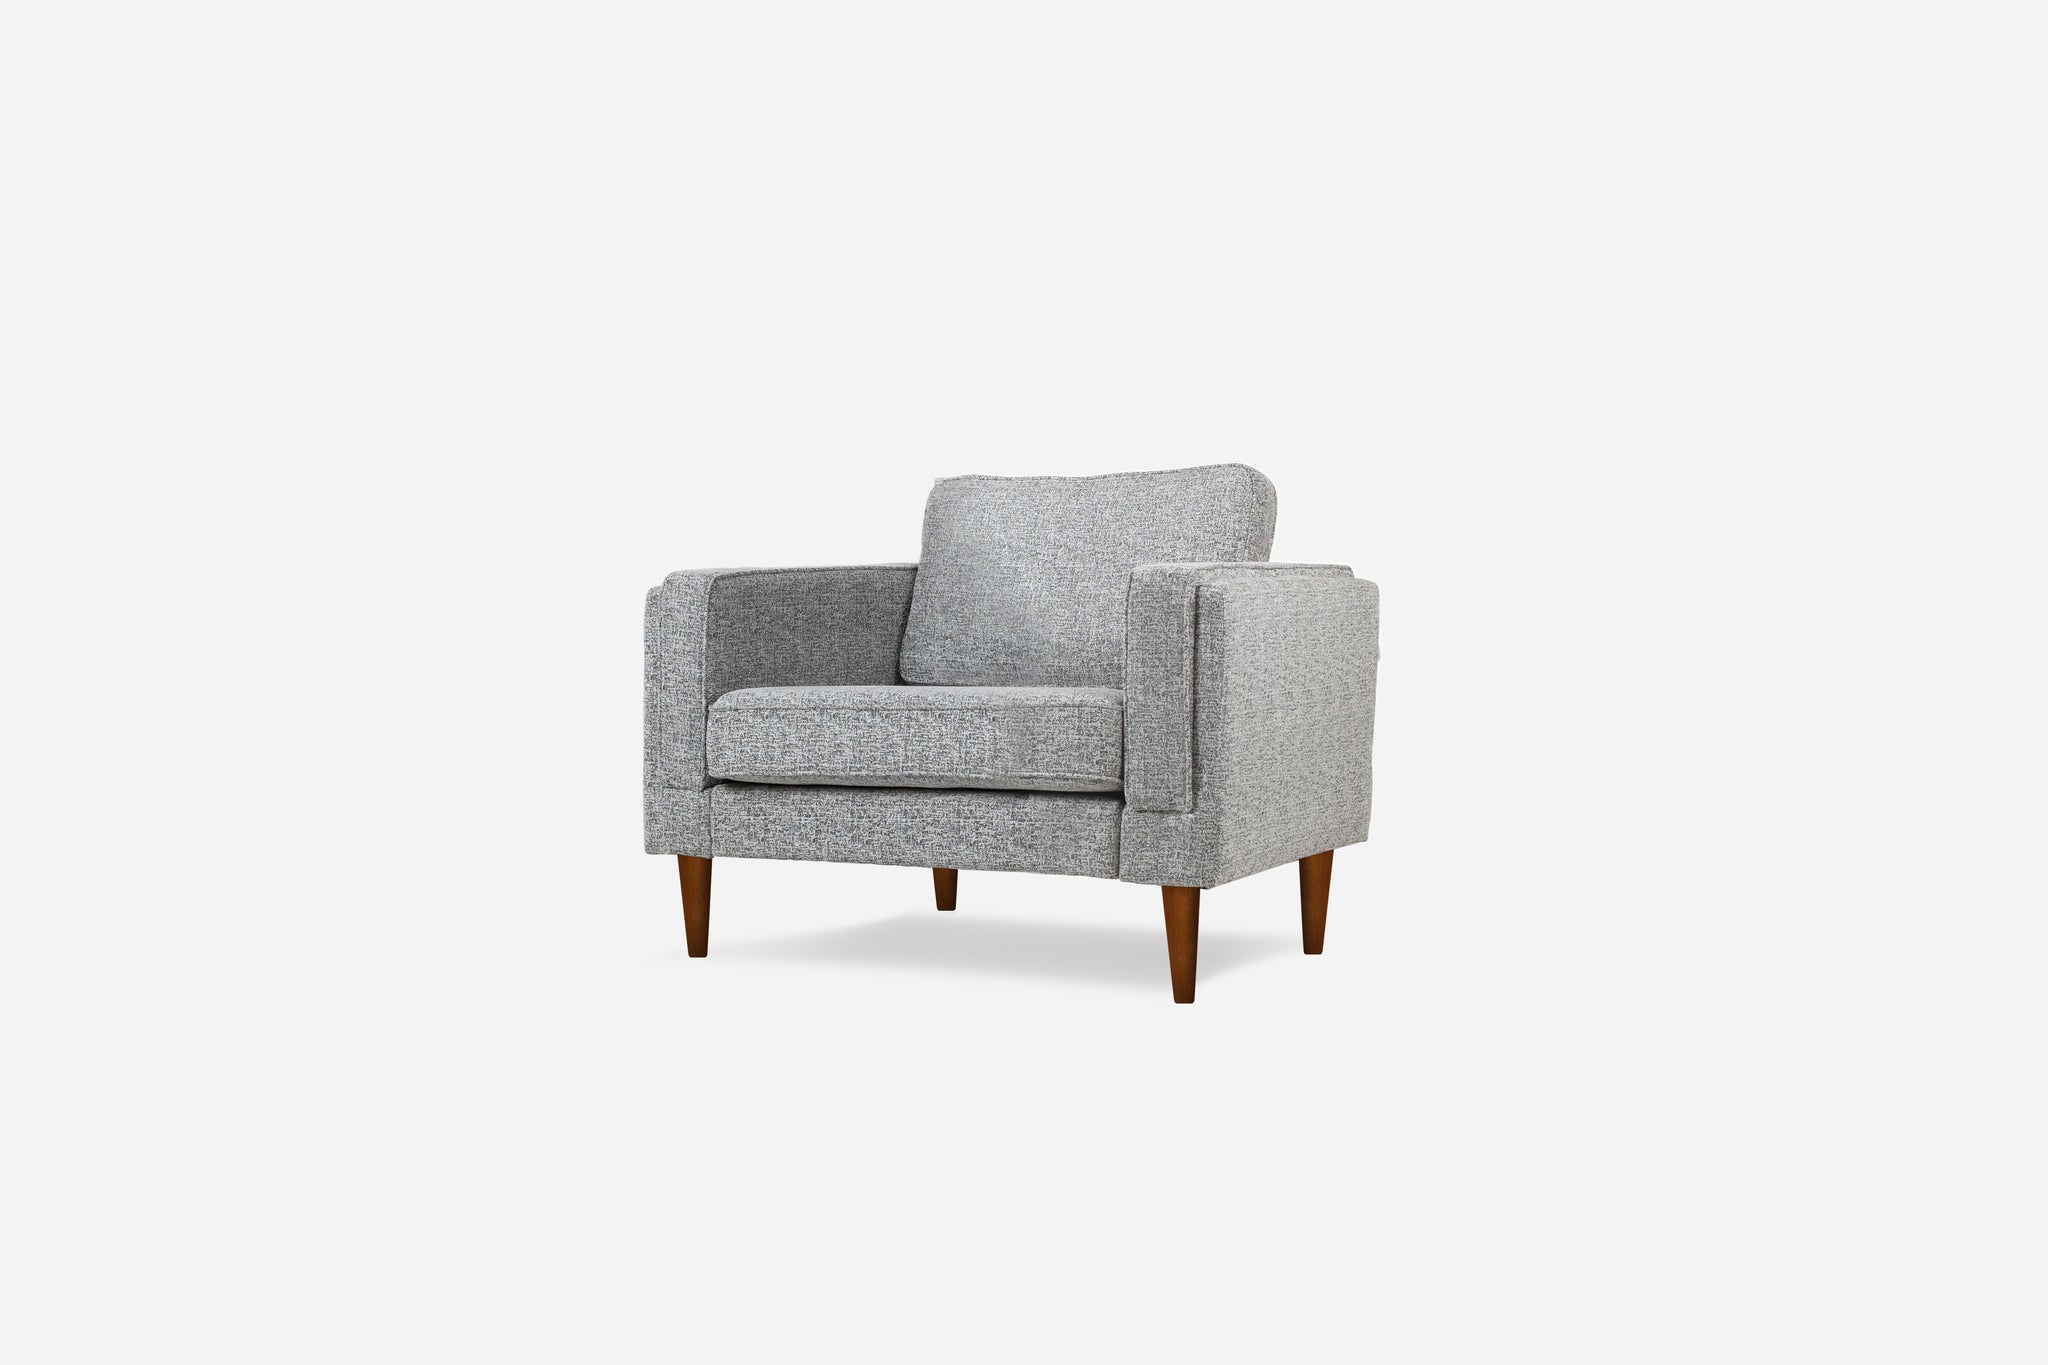 albany armchair shown in grey fabric with walnut legs